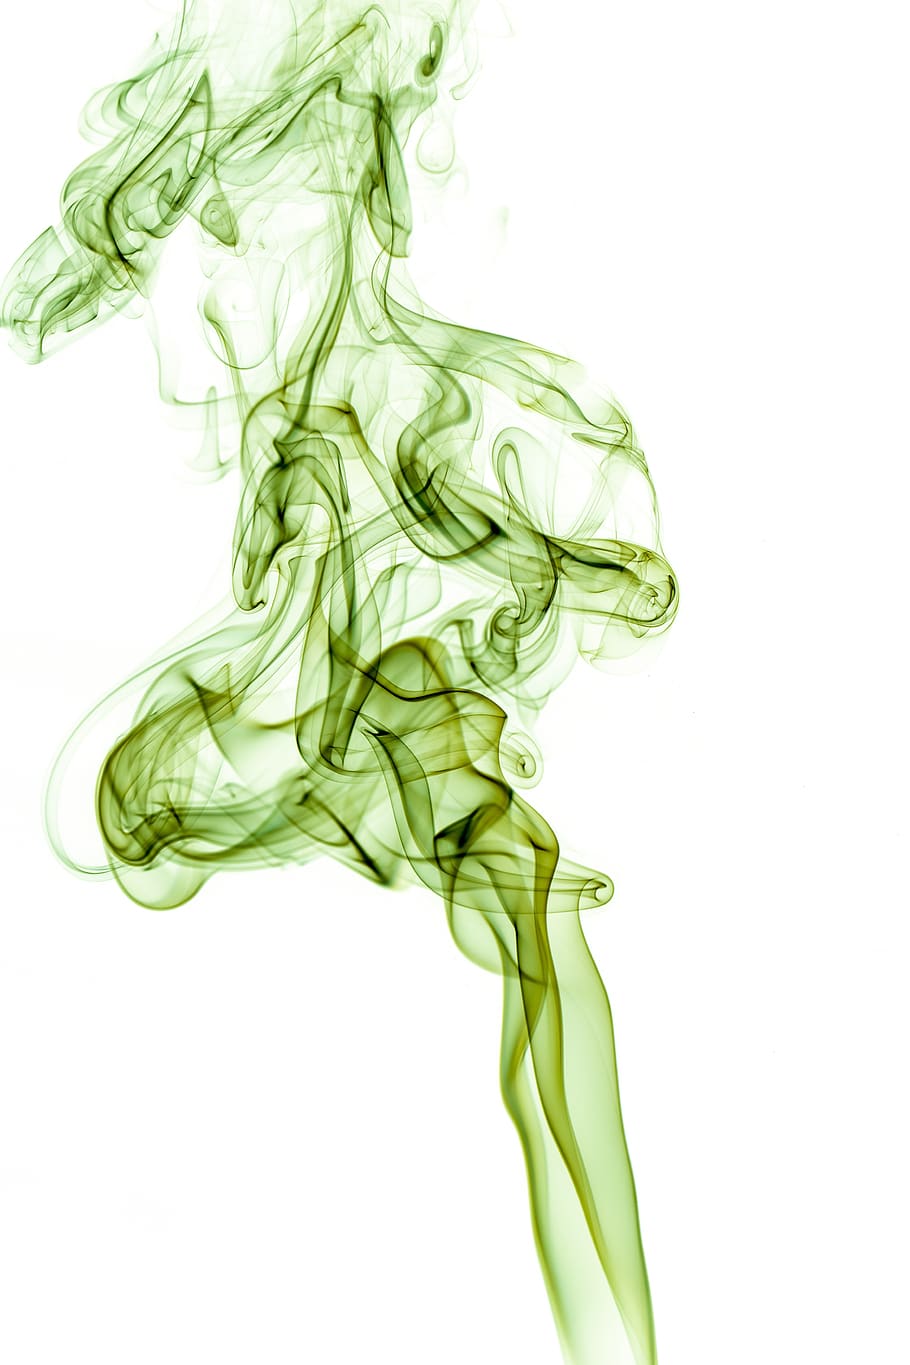 smoke, fire, burning, lighter, flame, incense, white background, smoke - physical structure, studio shot, green color